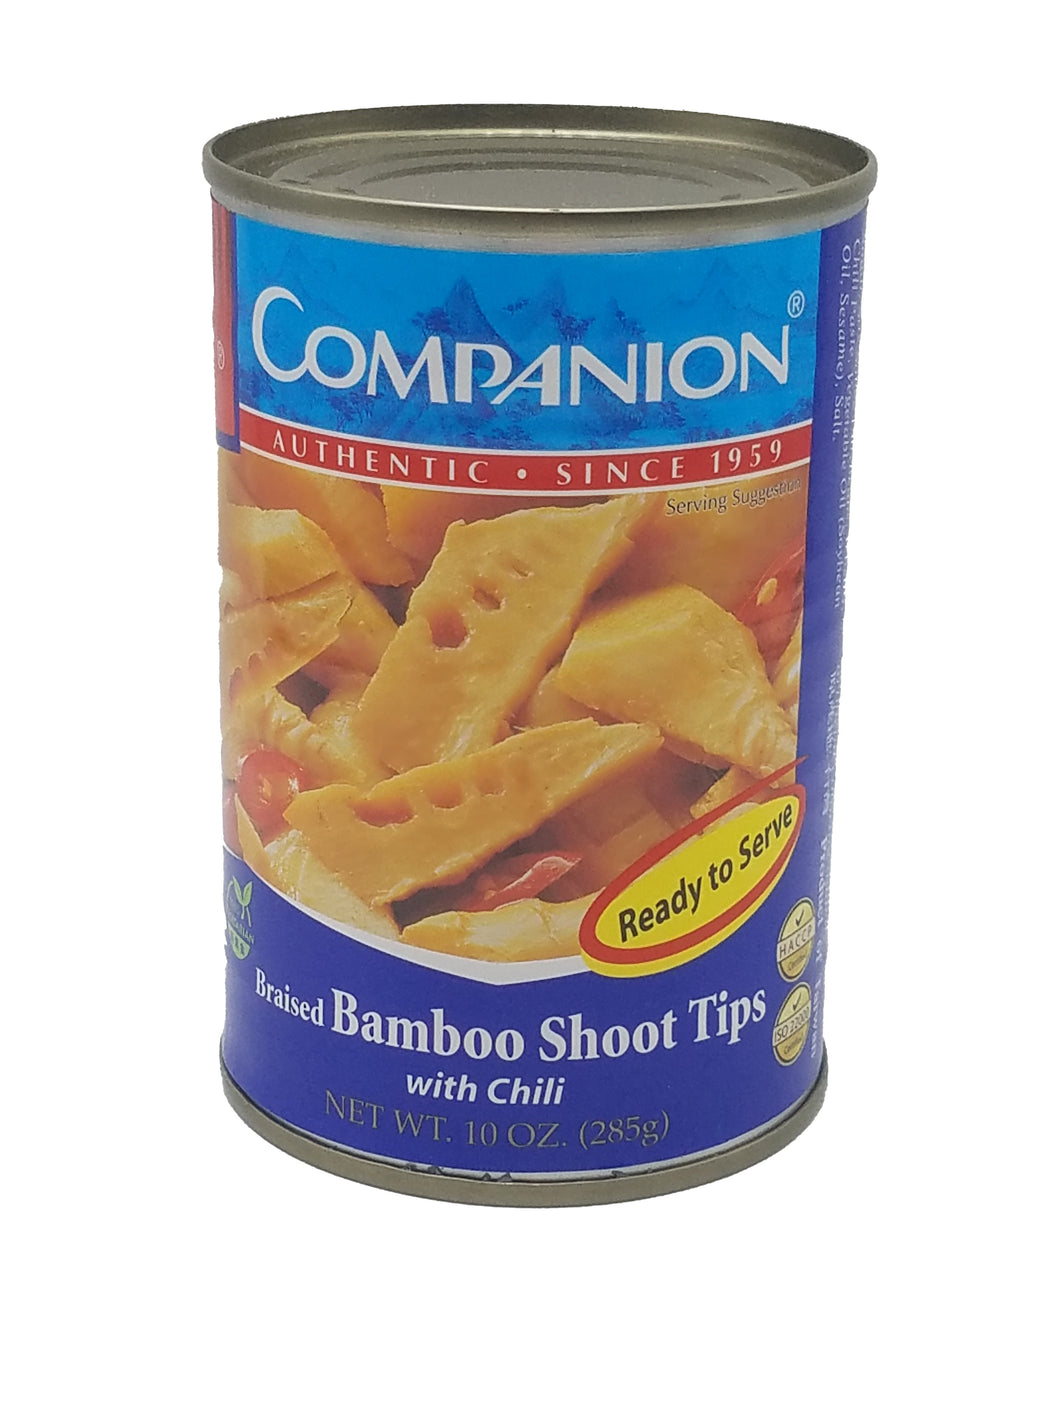 Companion Braised Bamboo Shoot Tips with Chili